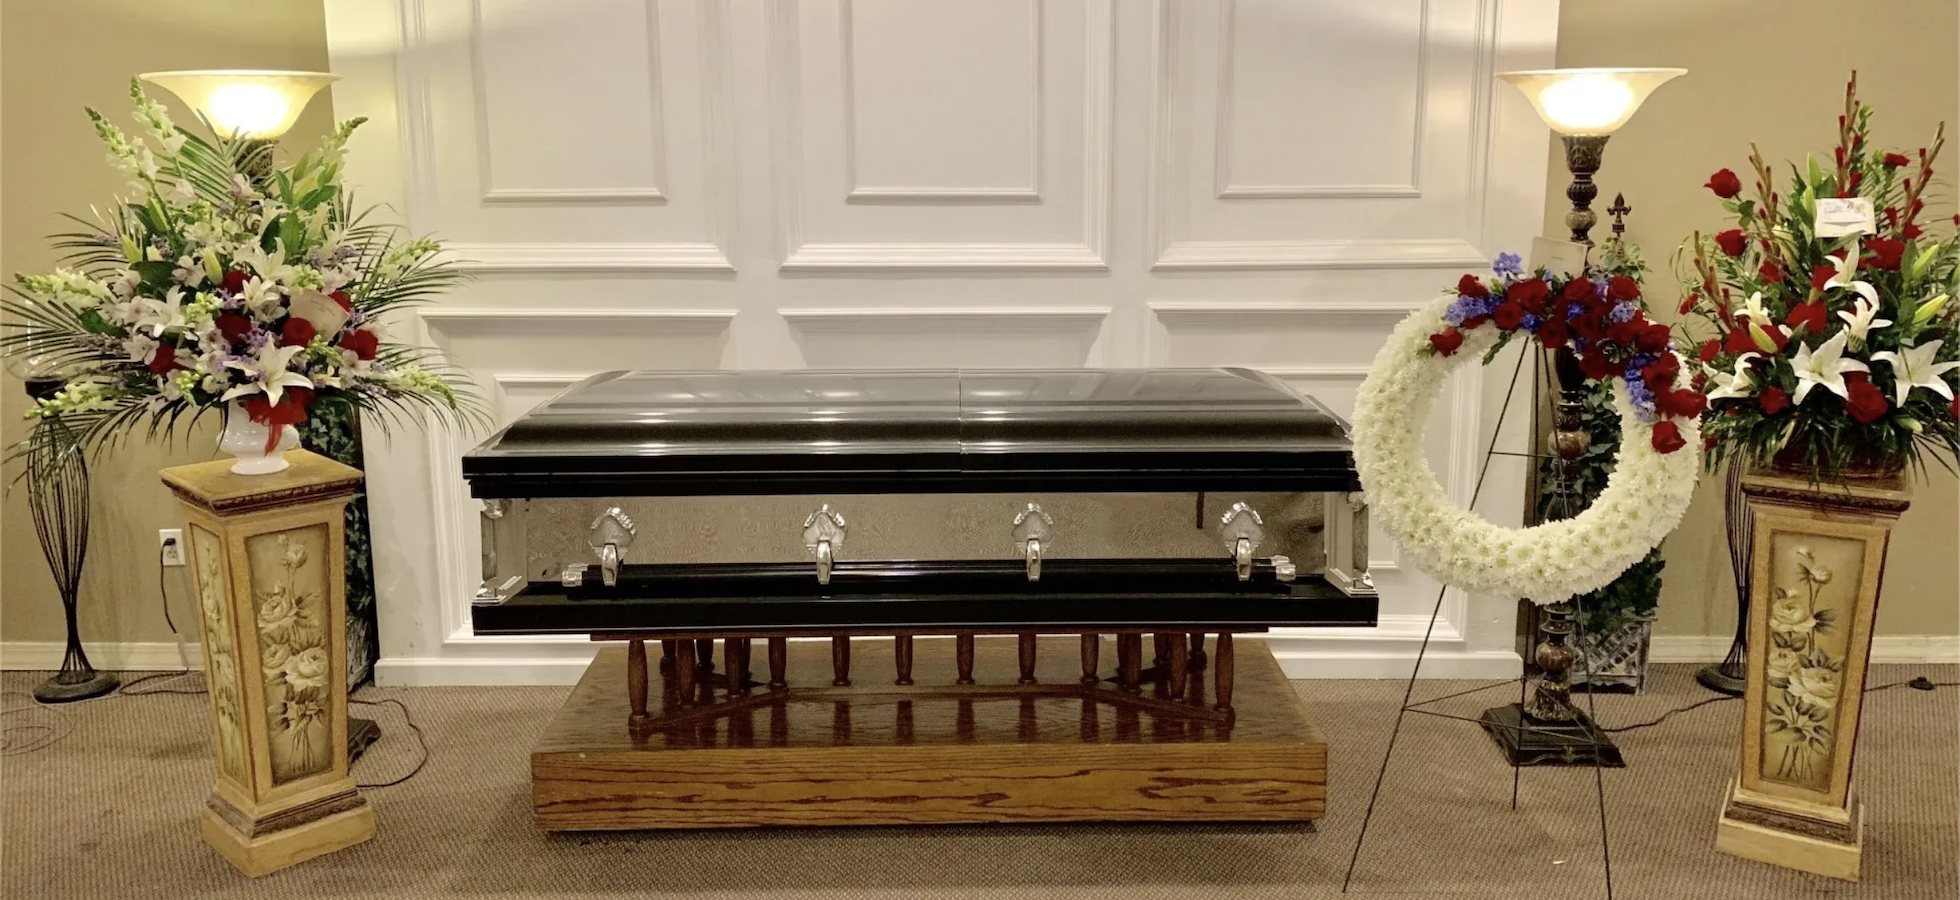 Photo of a Casket in a funeral home